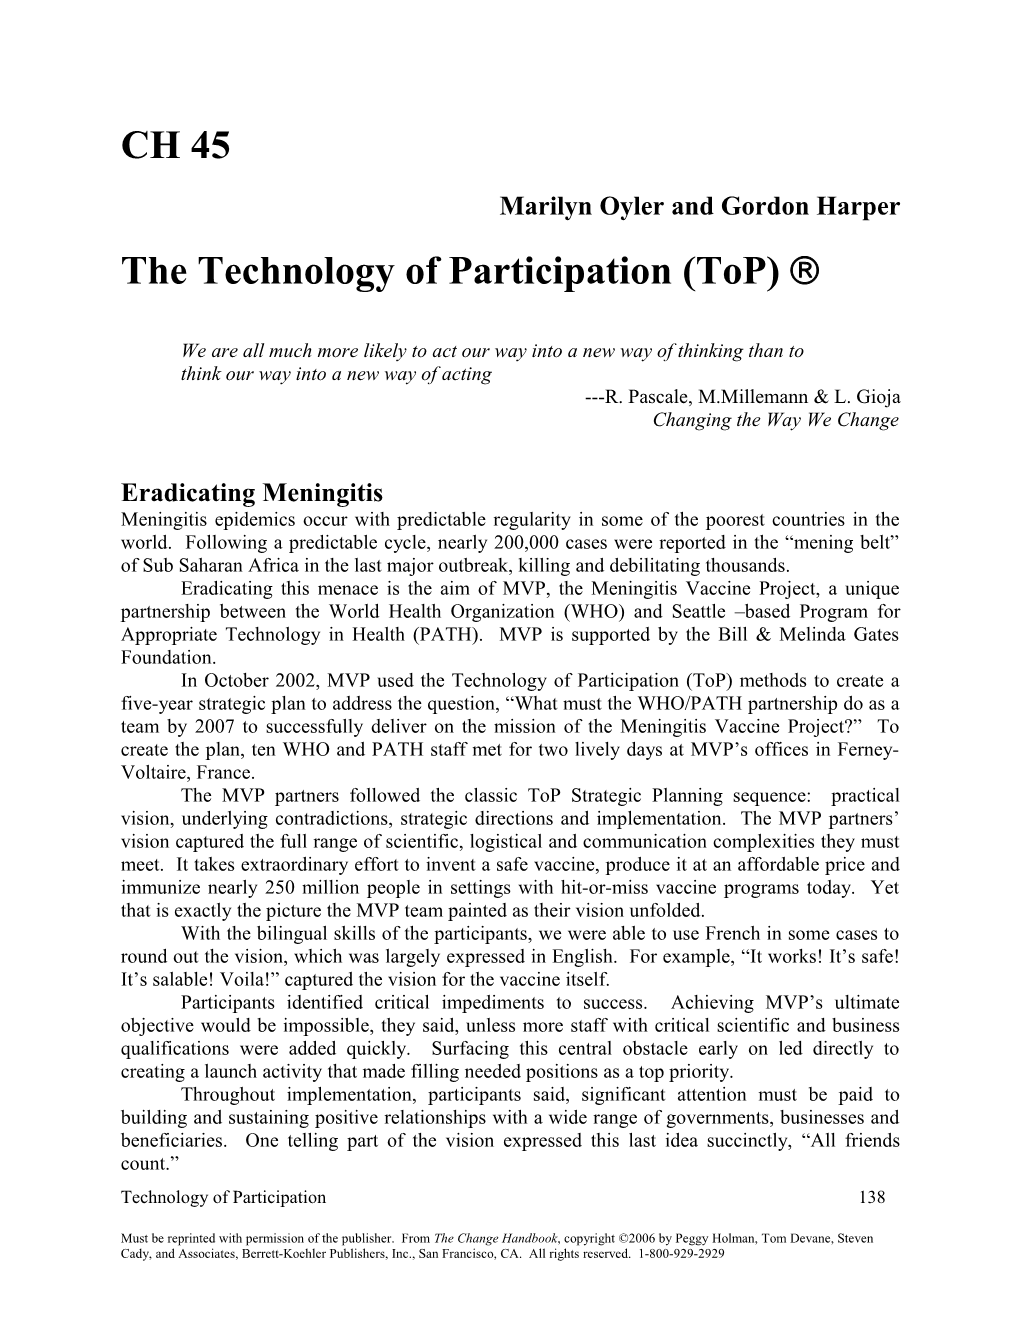 To Understand the Change Processes Collectively Known As the Technology of Participation